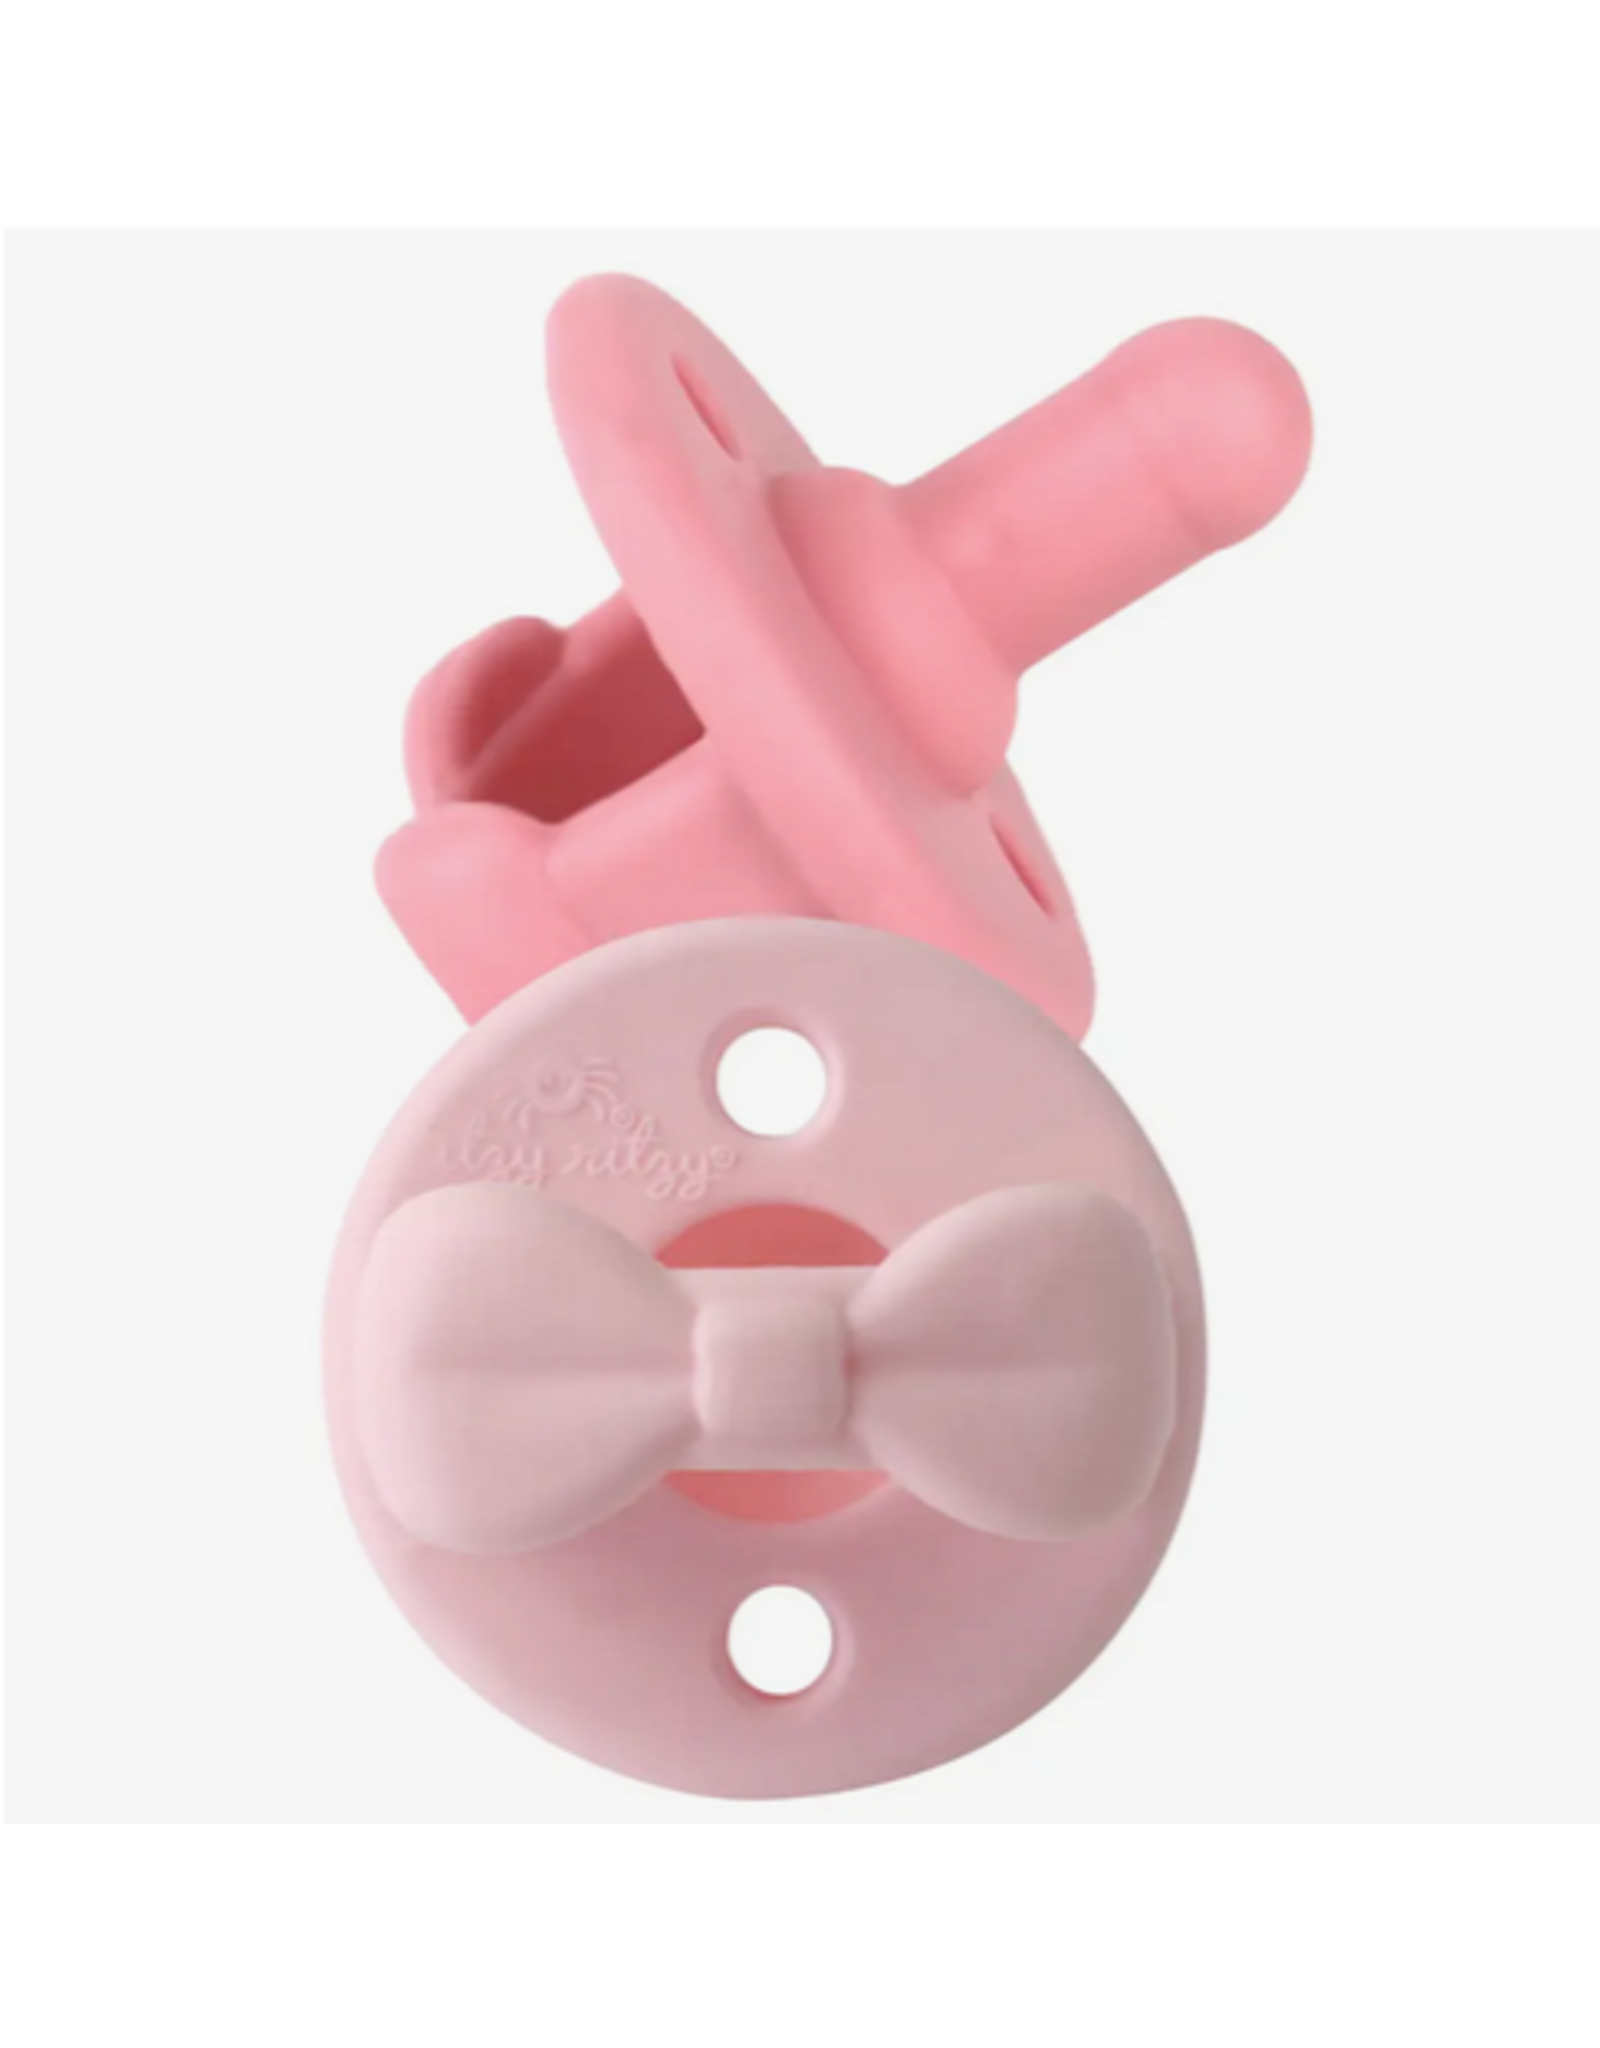 Itzy Ritzy Sweetie Soother Pacifier Sets (2pk)-Pink Bows